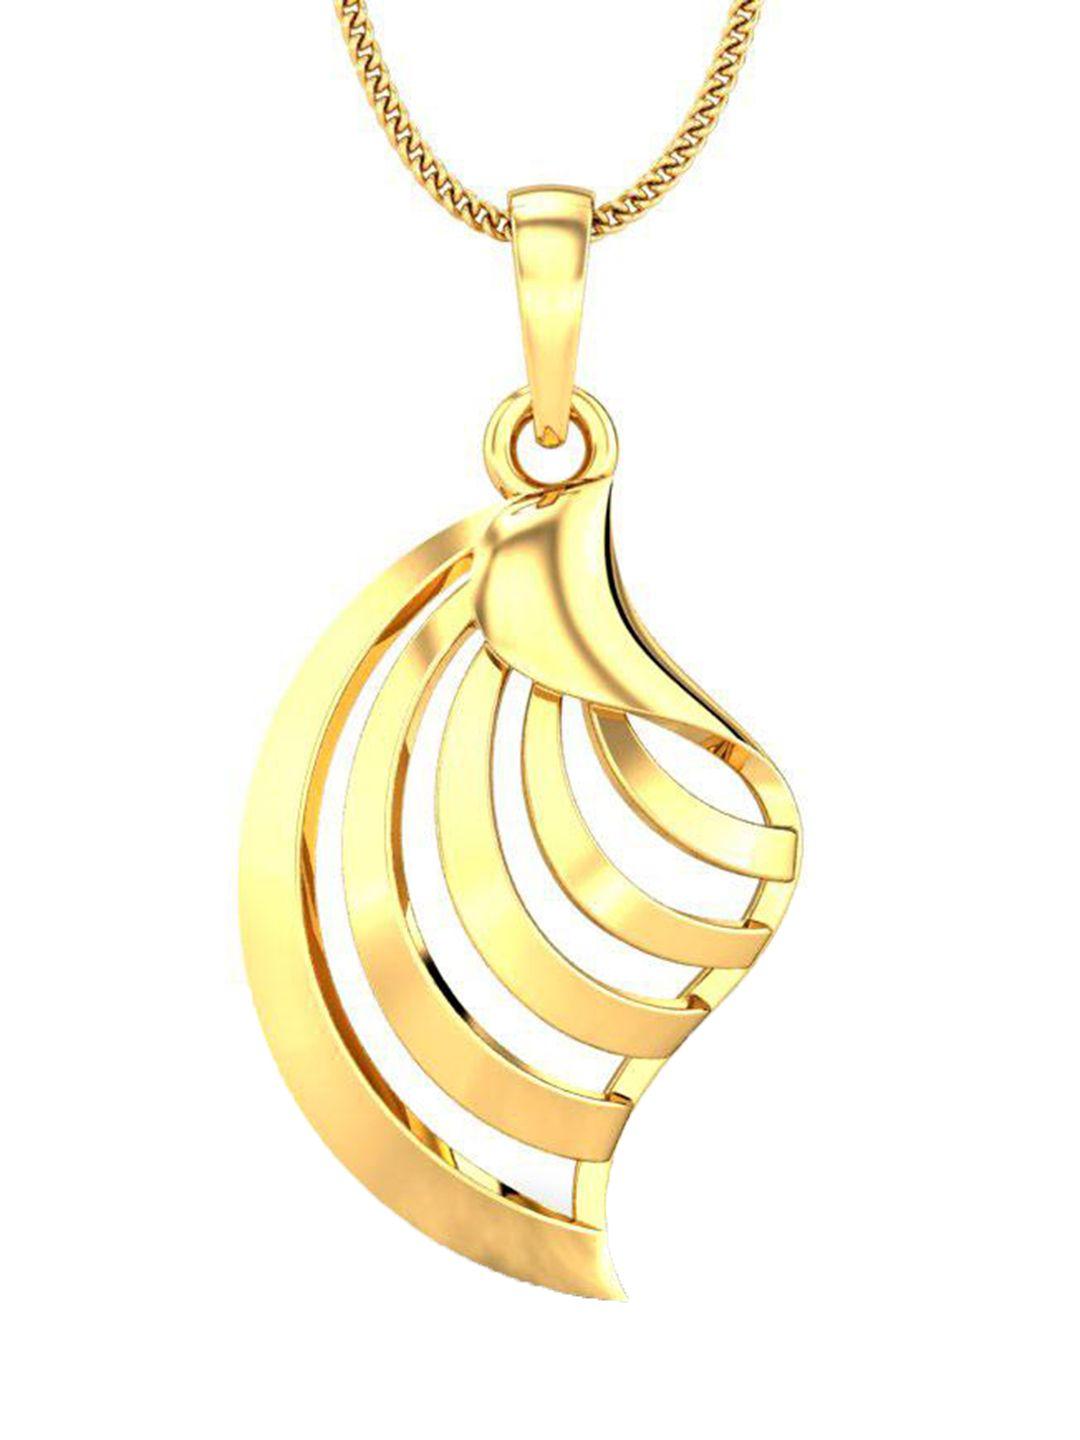 CANDERE A KALYAN JEWELLERS COMPANY 18KT Gold Pendant-1.14gm